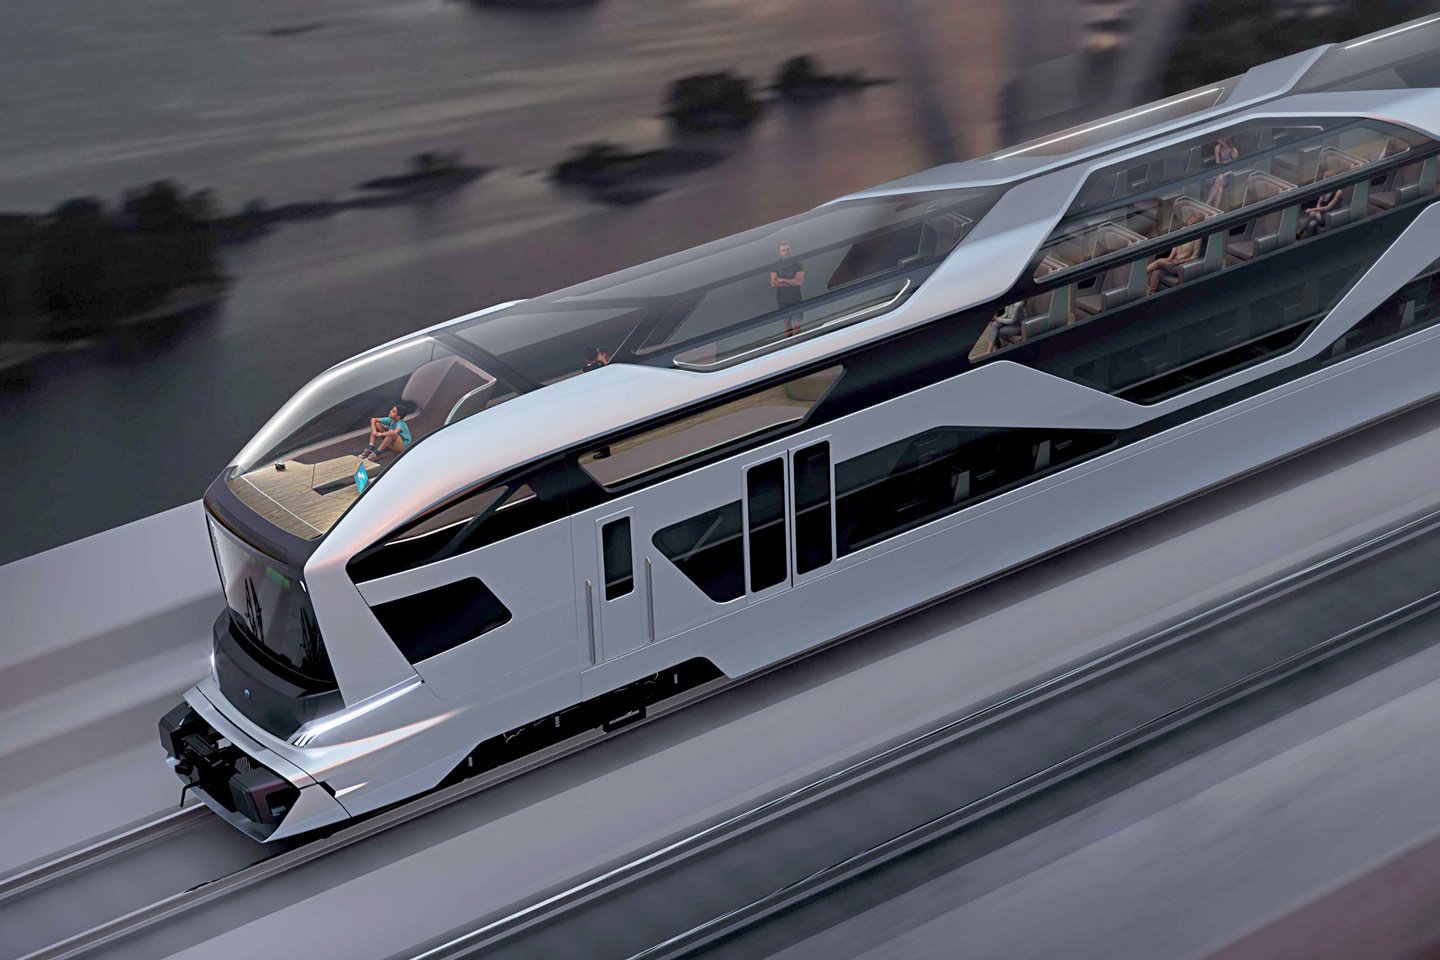 #This electric train’s transparent panoramic roof gives you an open-air view as you travel across the country